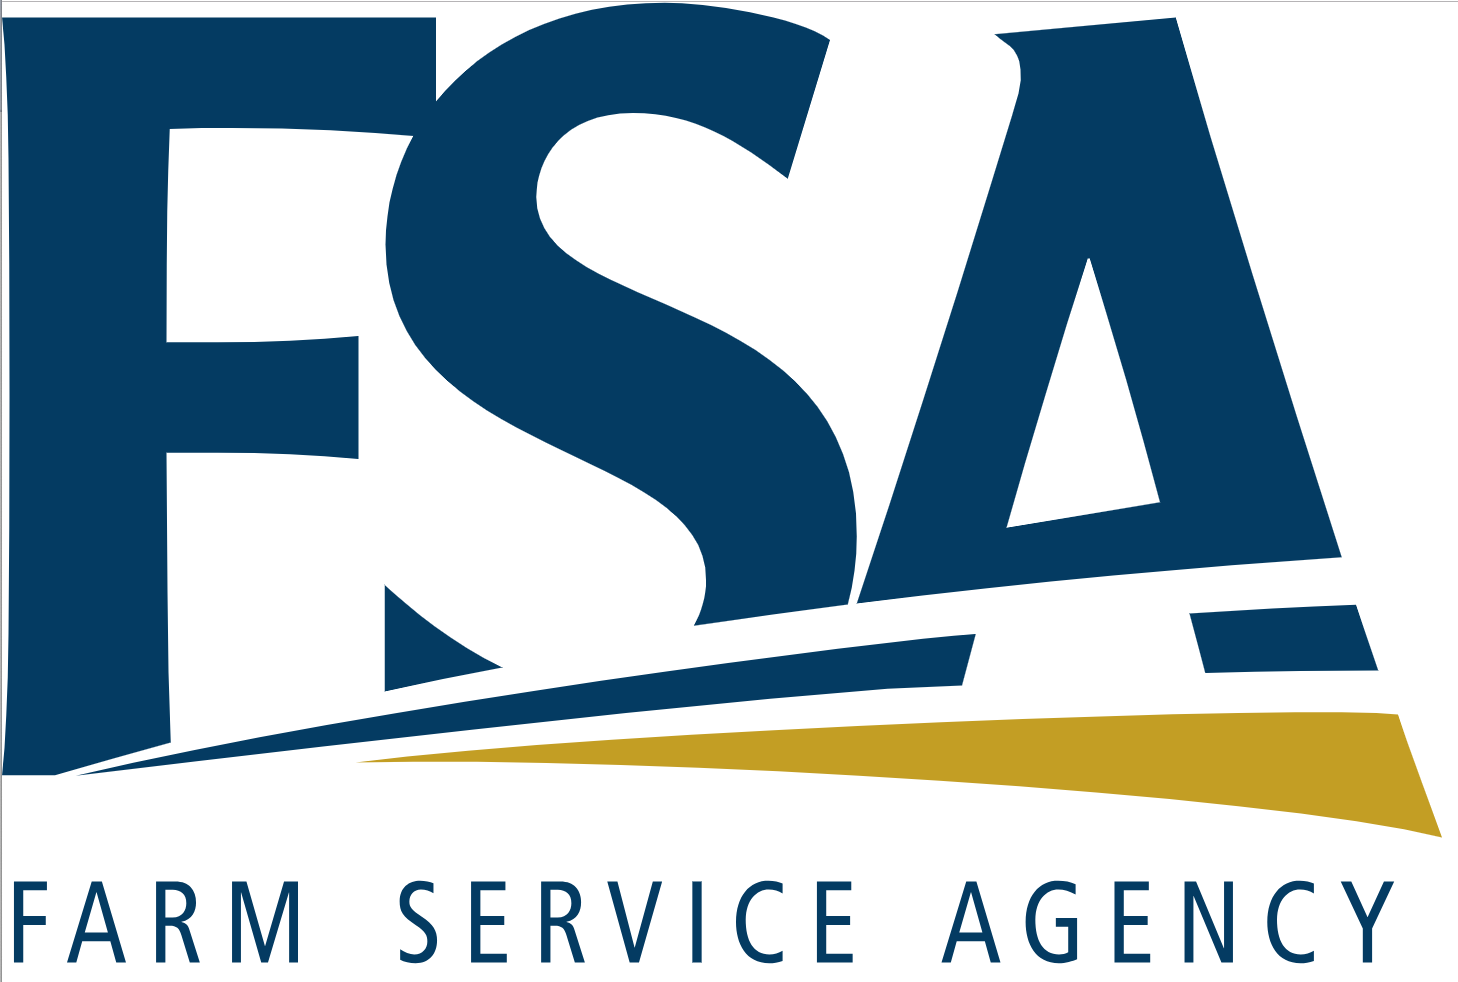 USDA Announces Temporary Reopening of FSA Offices – Farmers Union Urges Members to Take Advantage of Services